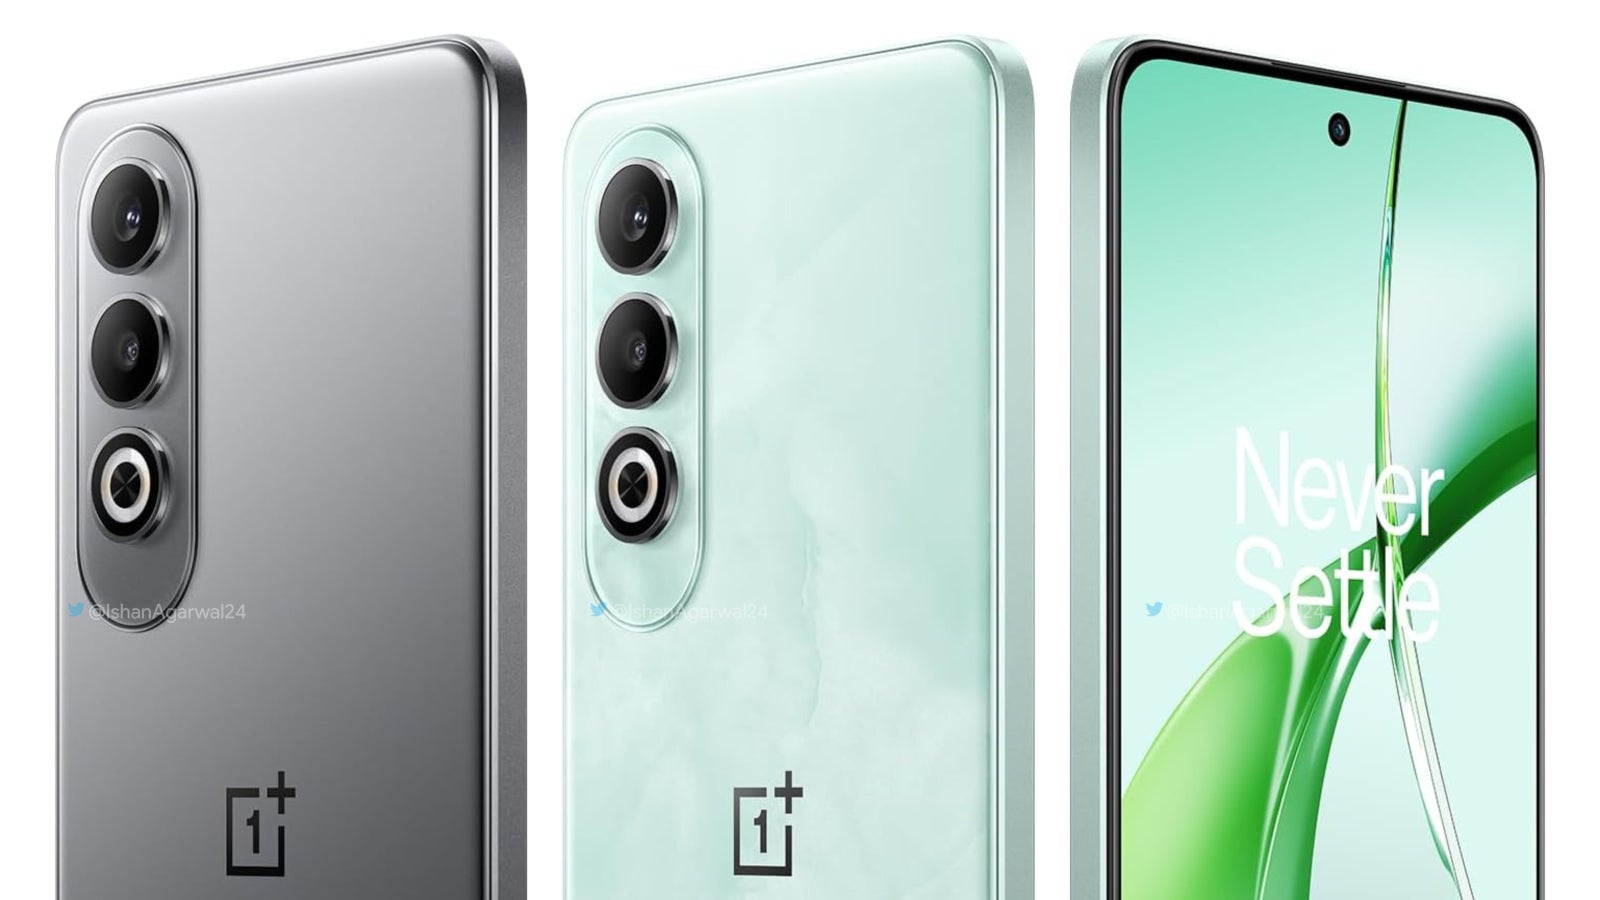 OnePlus Nord CE4 design, specs and price ahead of April launch